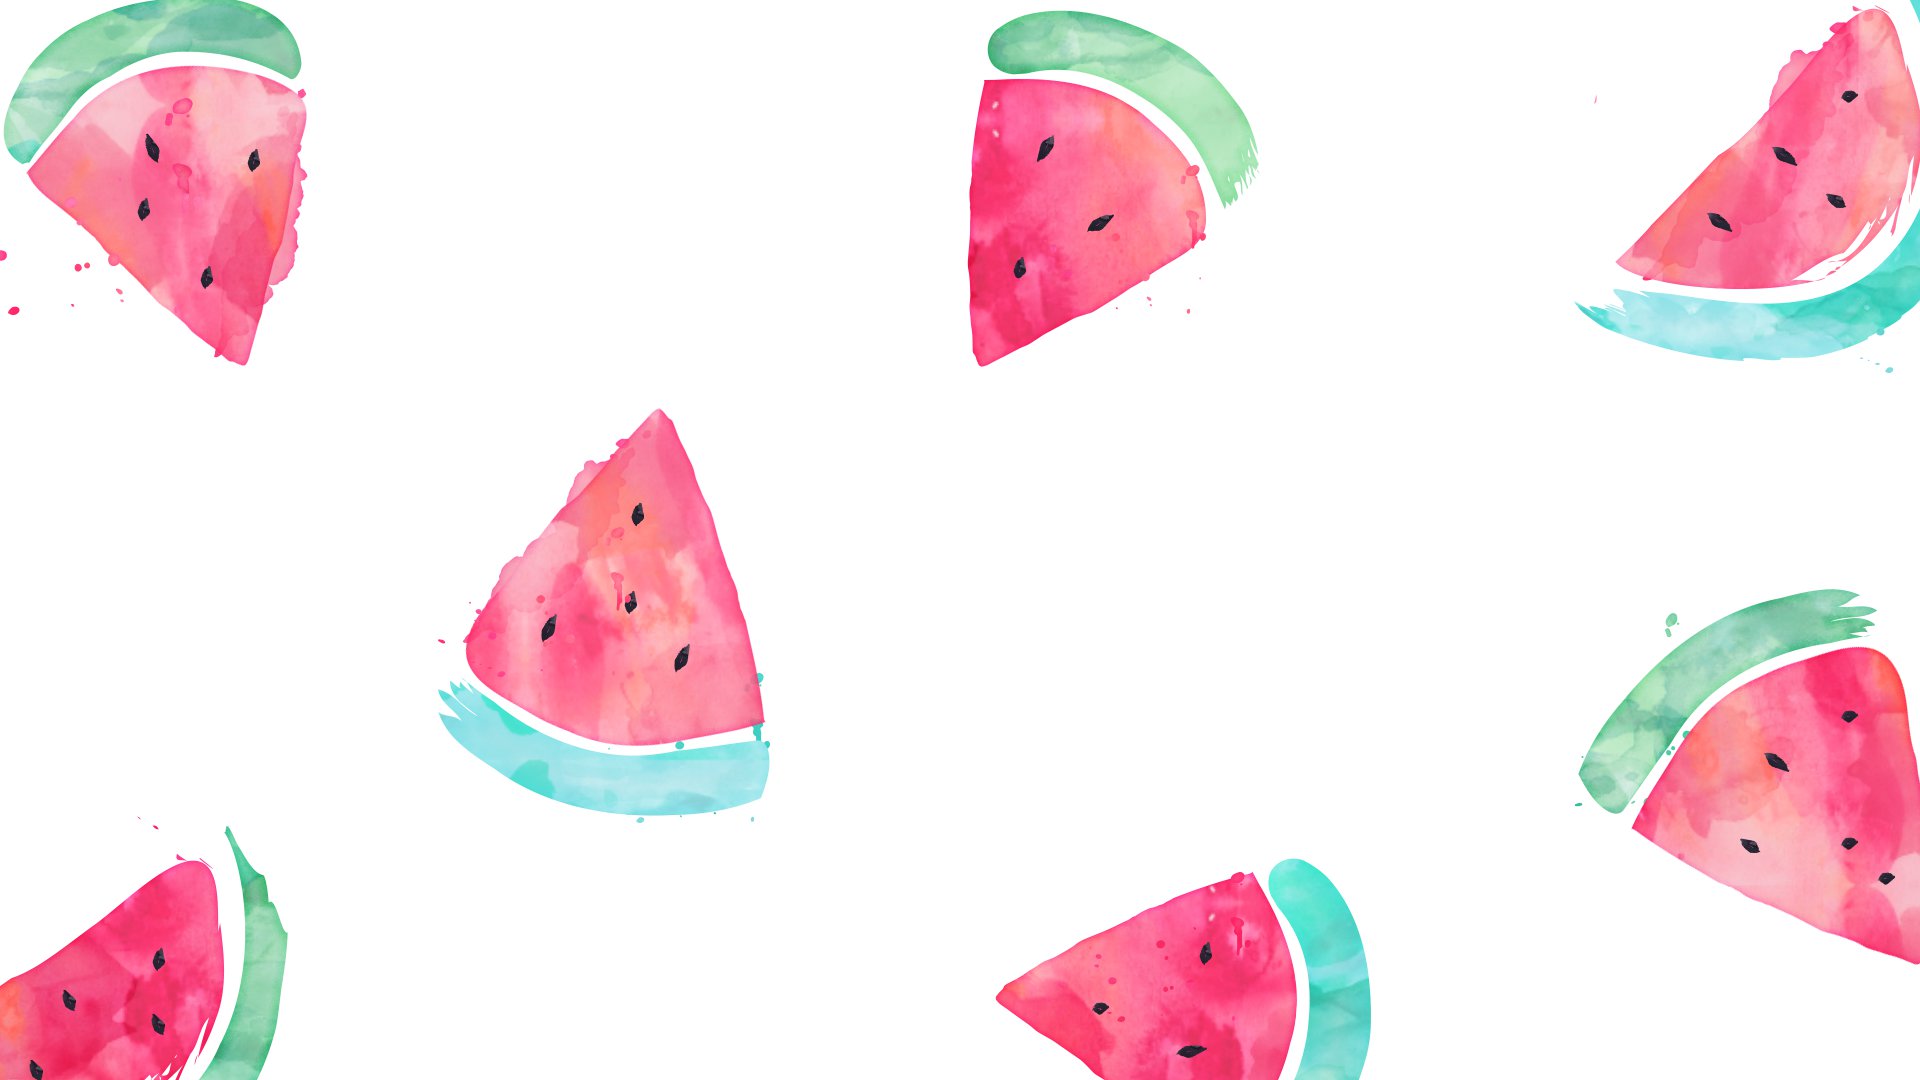 Watermelon Wallpapers and Background Images - stmed.net